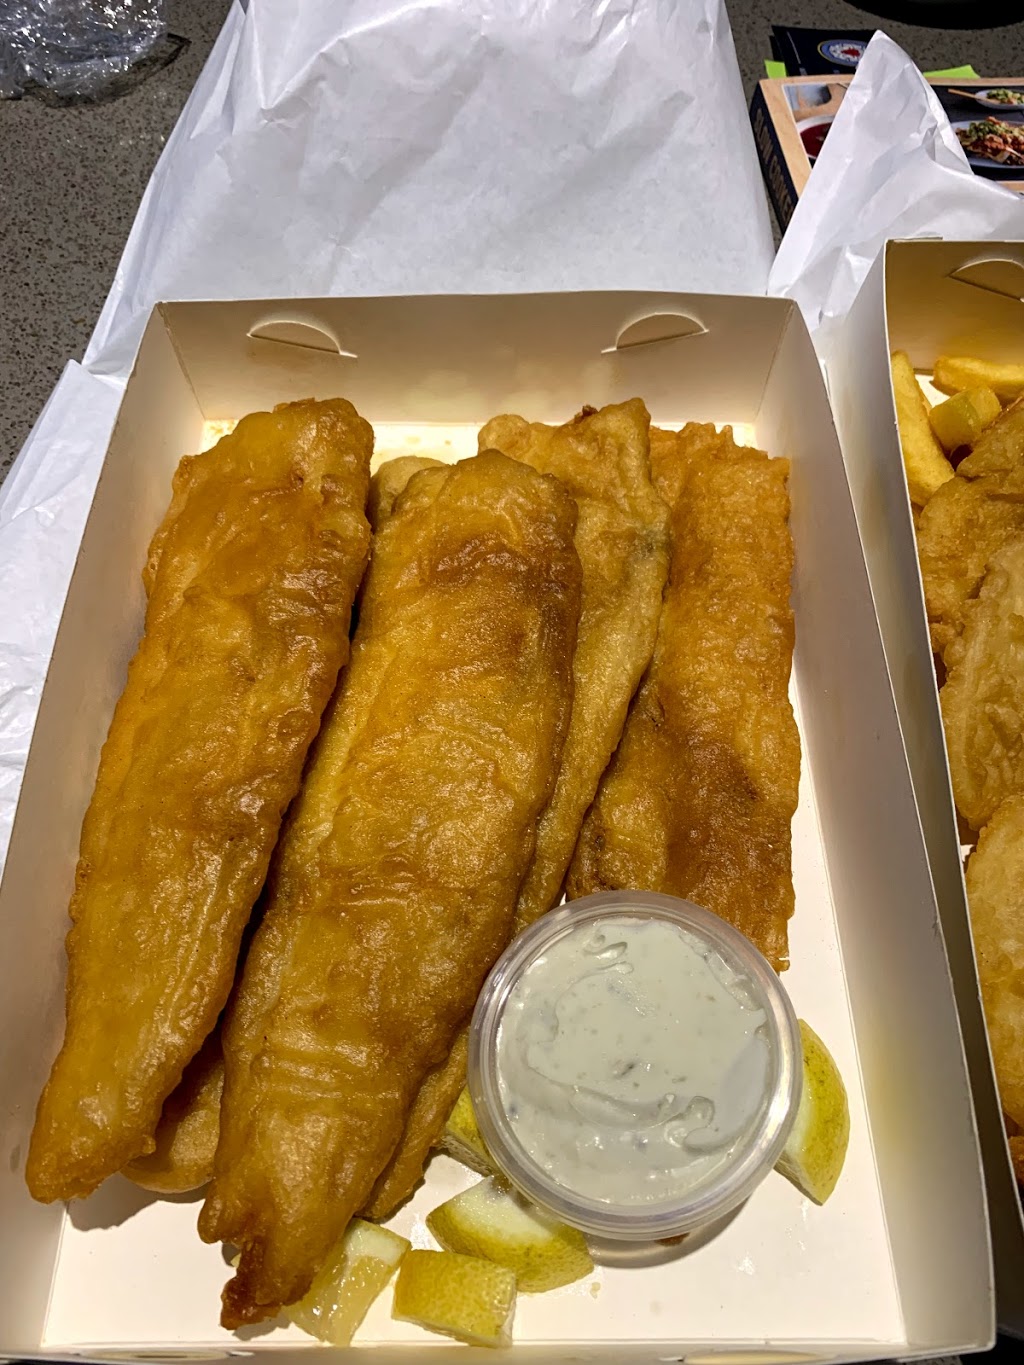 Waurn Ponds Fish and Chips | meal takeaway | 6/173/199 Pioneer Rd, Waurn Ponds VIC 3216, Australia | 0352412930 OR +61 3 5241 2930